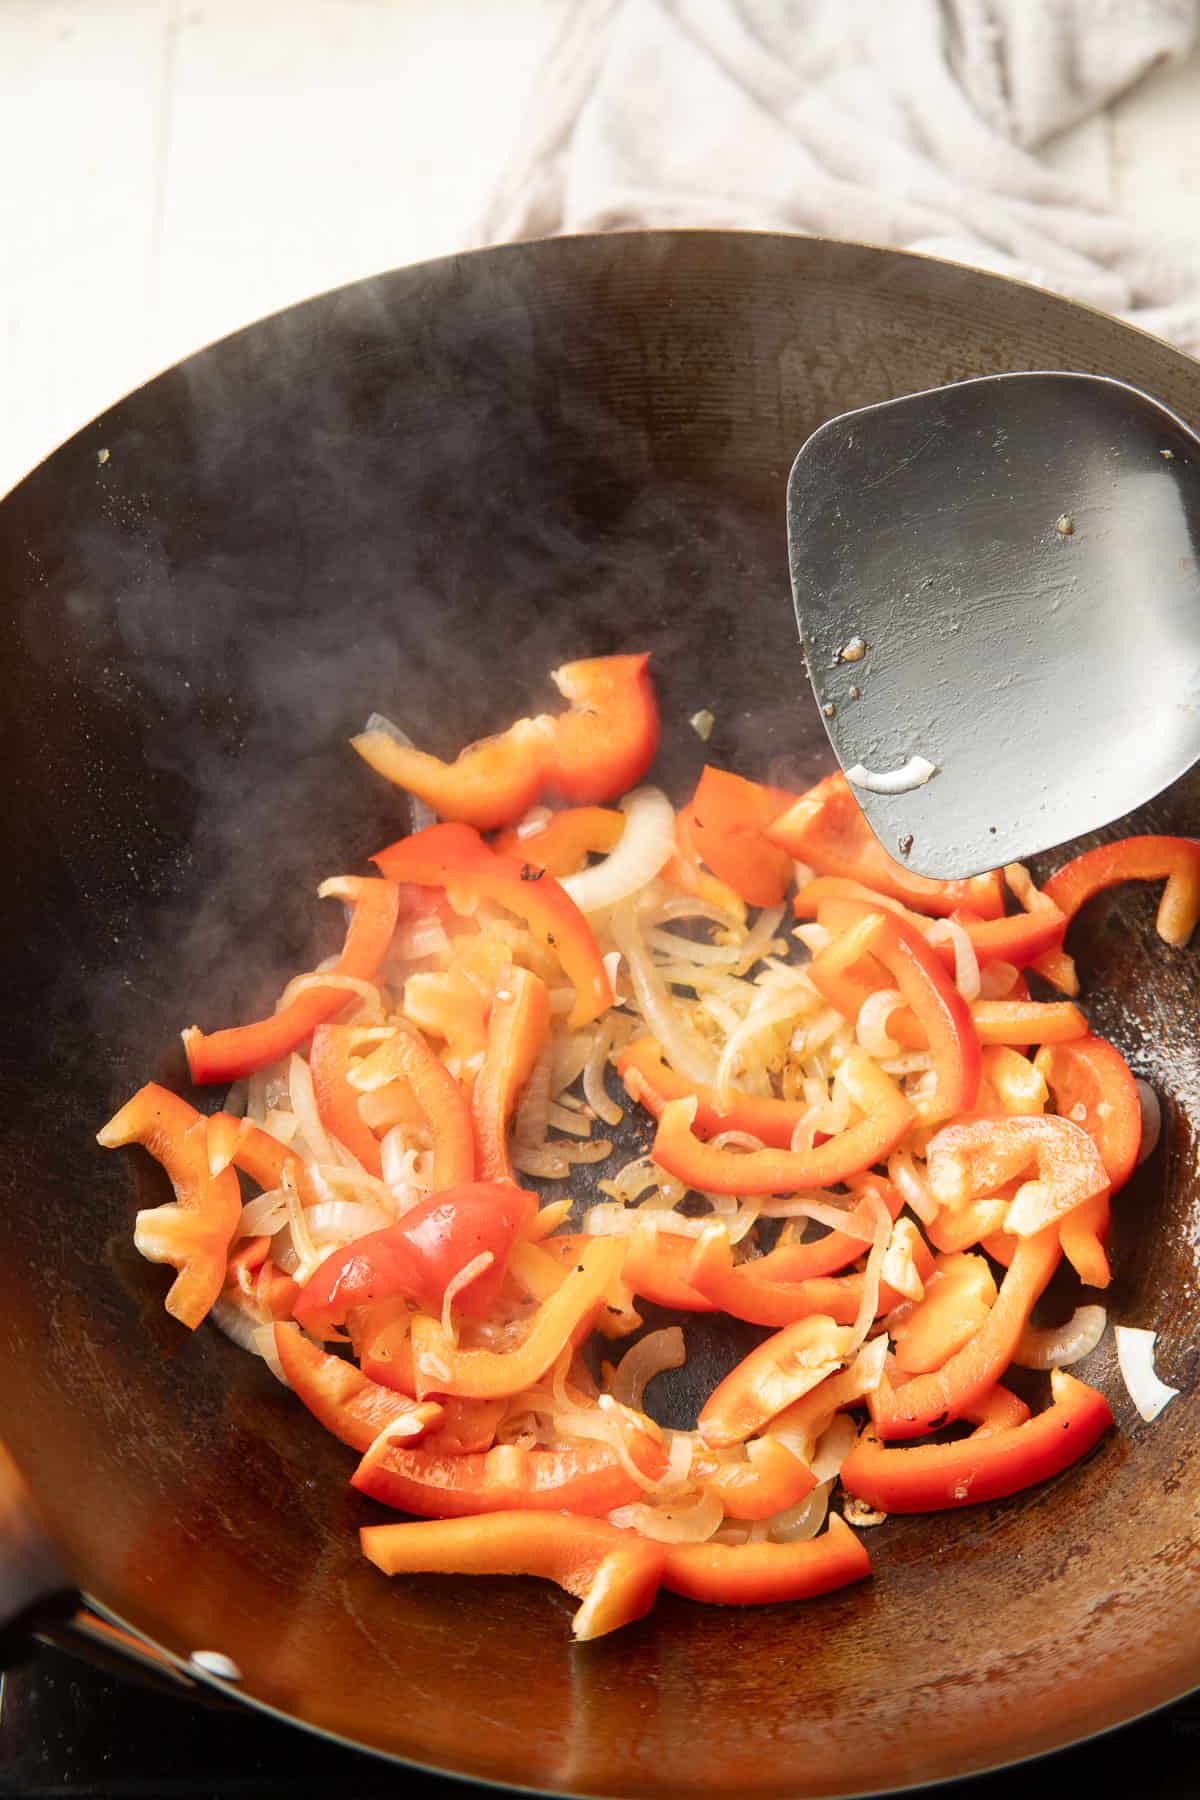 Peppers and onions stir-frying in a wok.